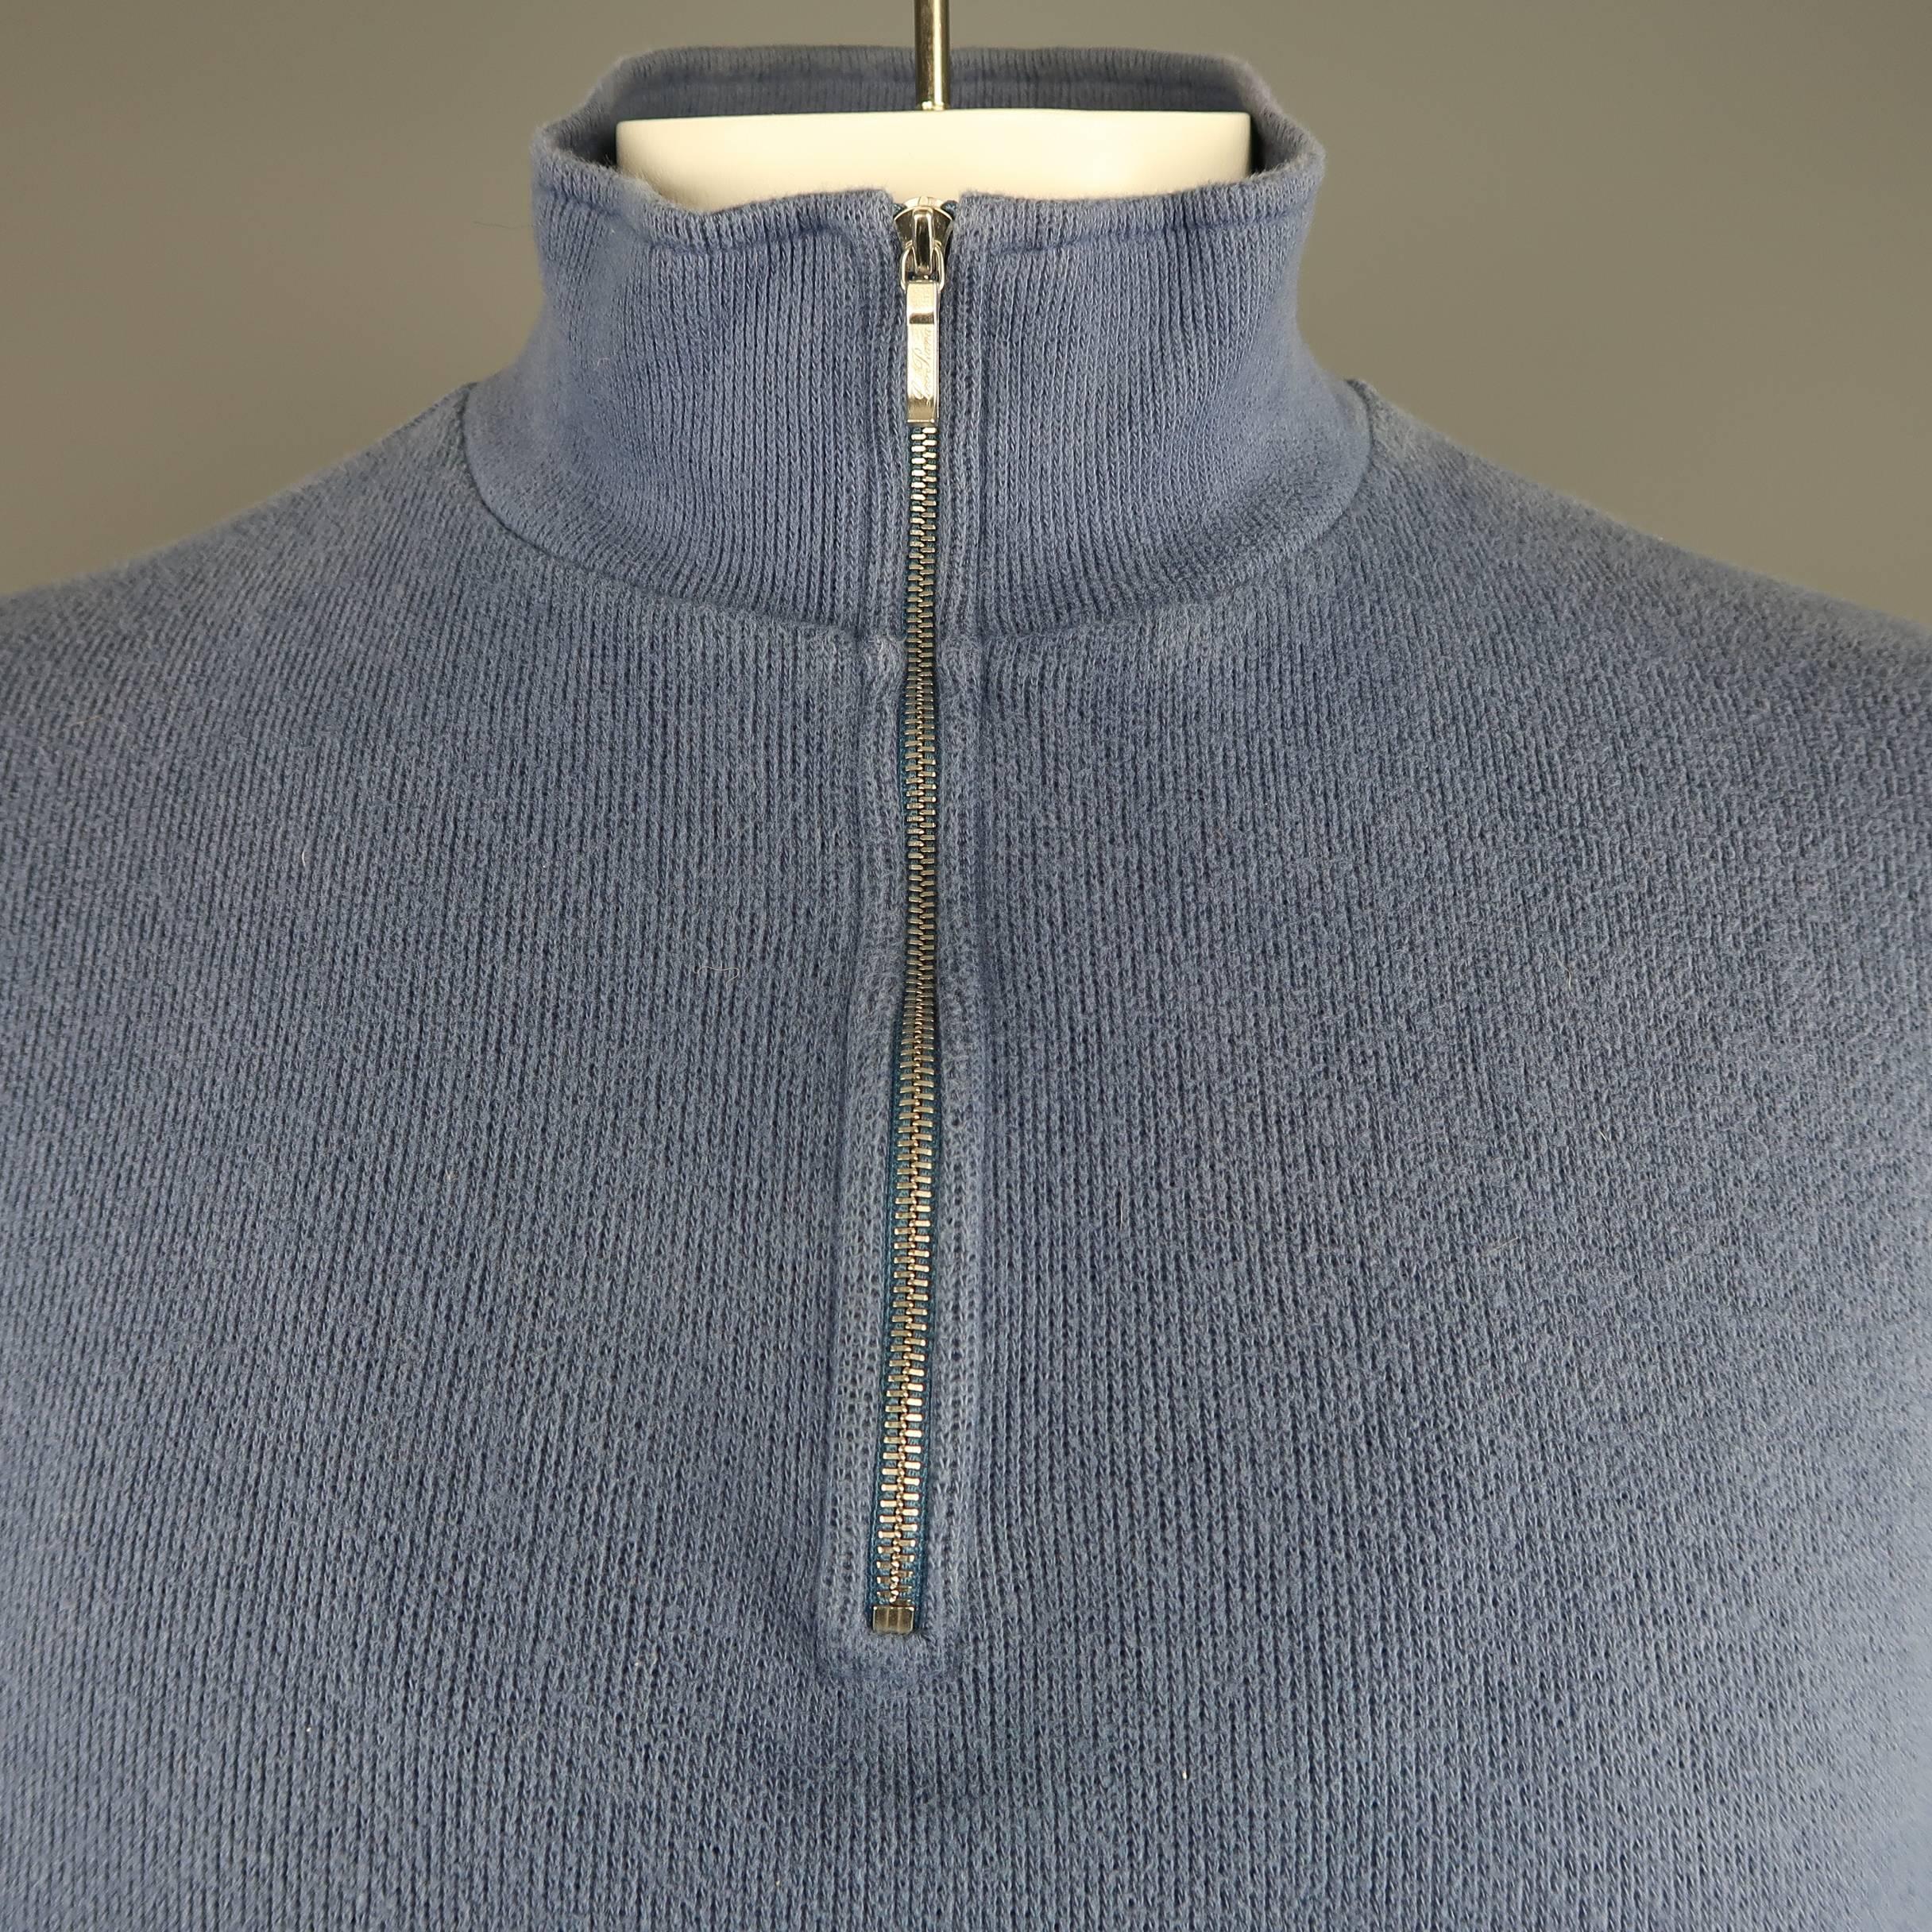 LORO PIANA pullover comes in muted blue ribbed jersey knit with a silver tone half zip mock neck. Wear throughout. As-is.  Made in Italy.
 
Fair Pre-Owned Condition.
Marked: IT 52
 
Measurements:
 
Shoulder: 19 in.
Chest: 46 in.
Sleeve: 25